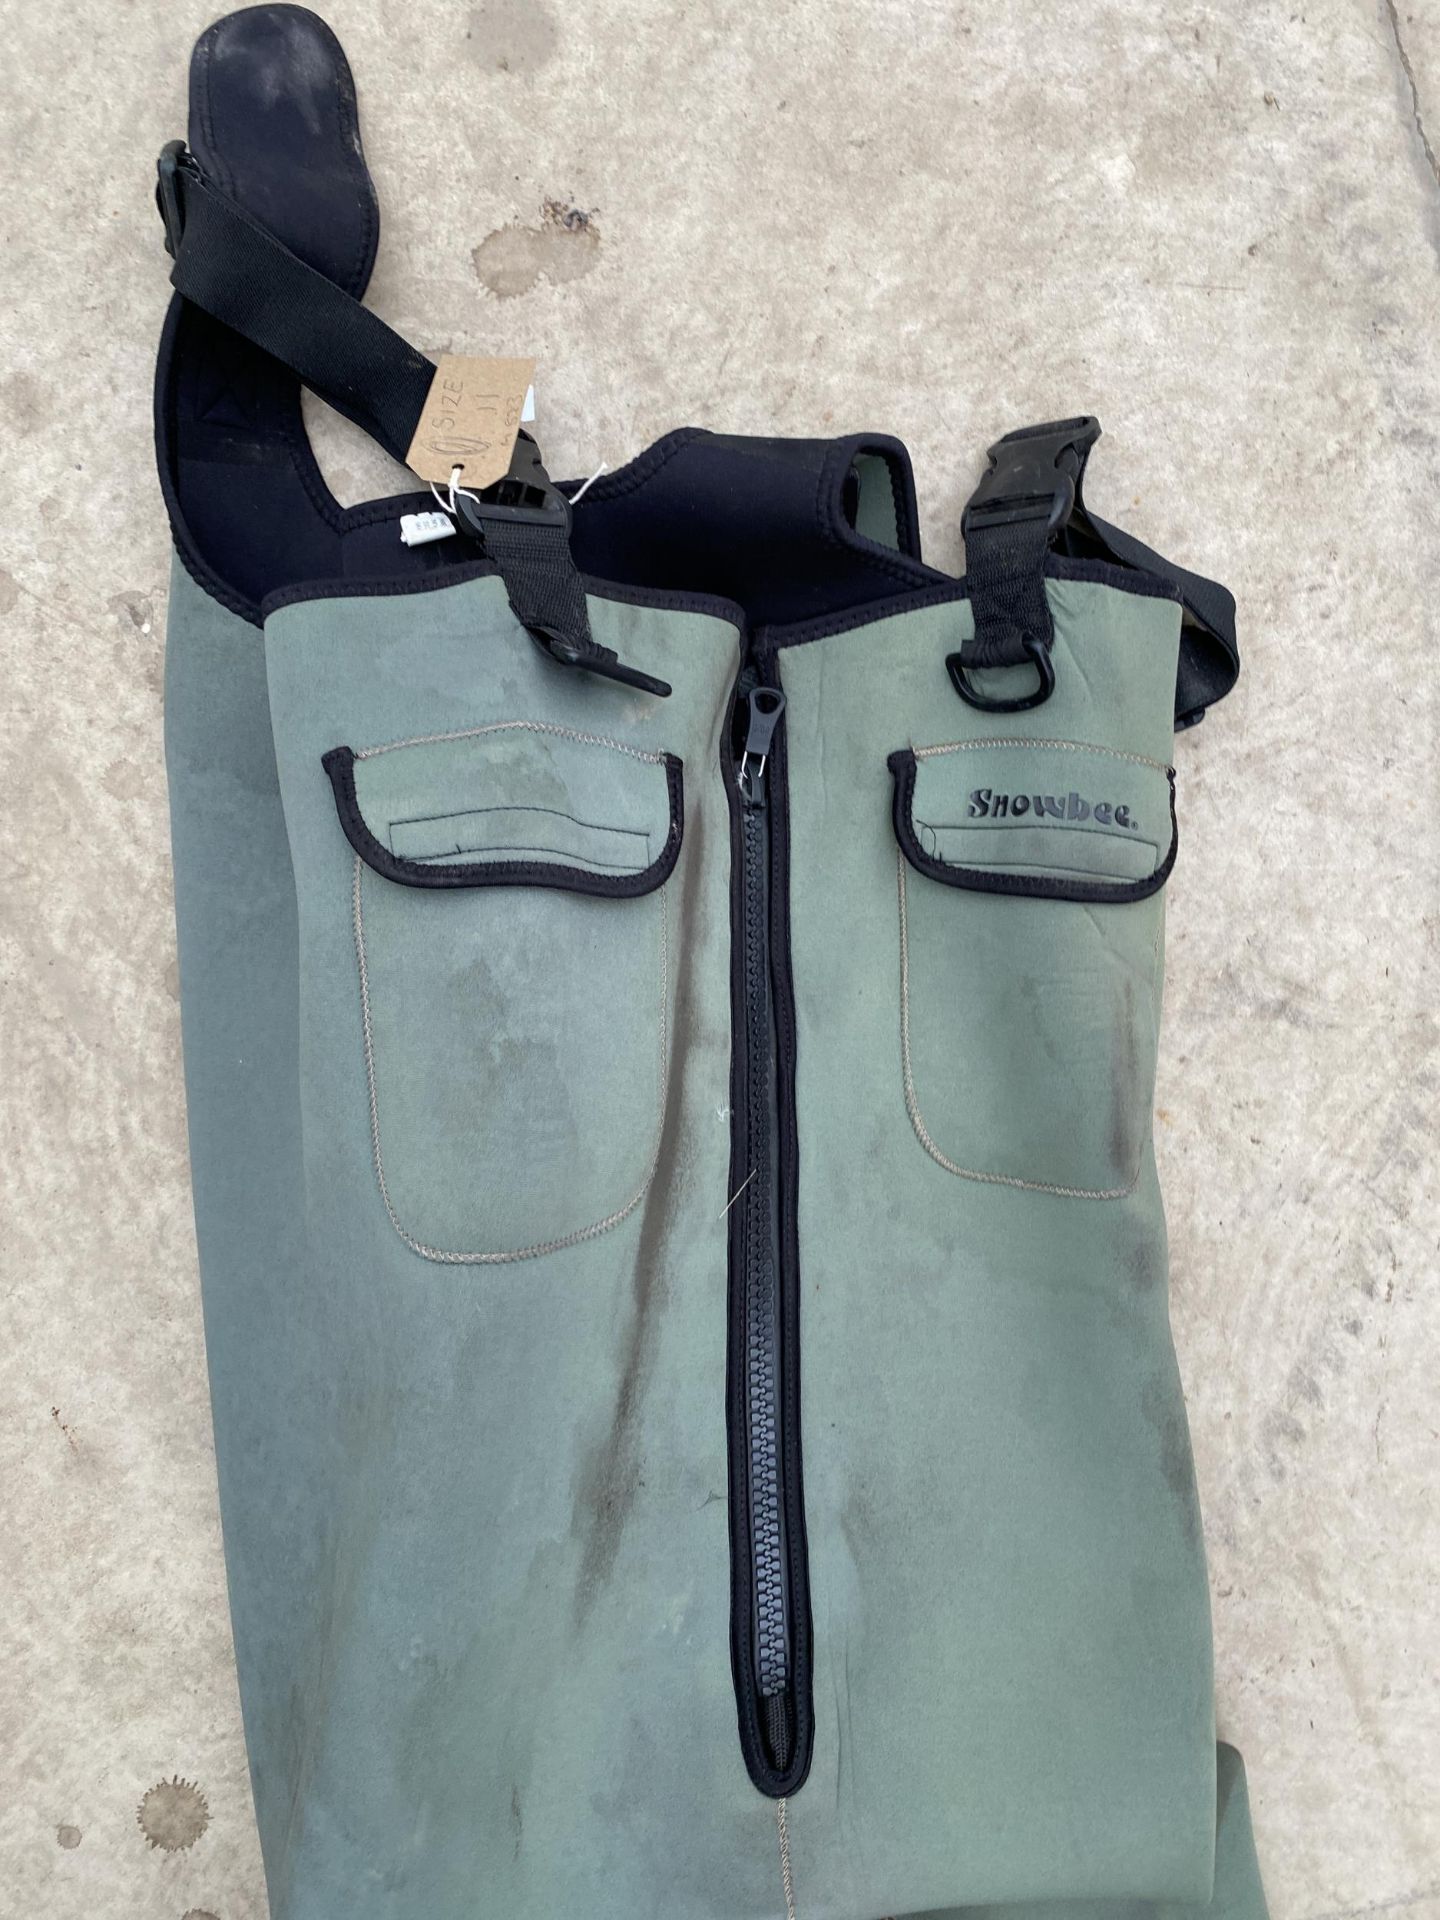 A PAIR OF SIZE 11 SNOWBEE CHEST WADERS - Image 2 of 3